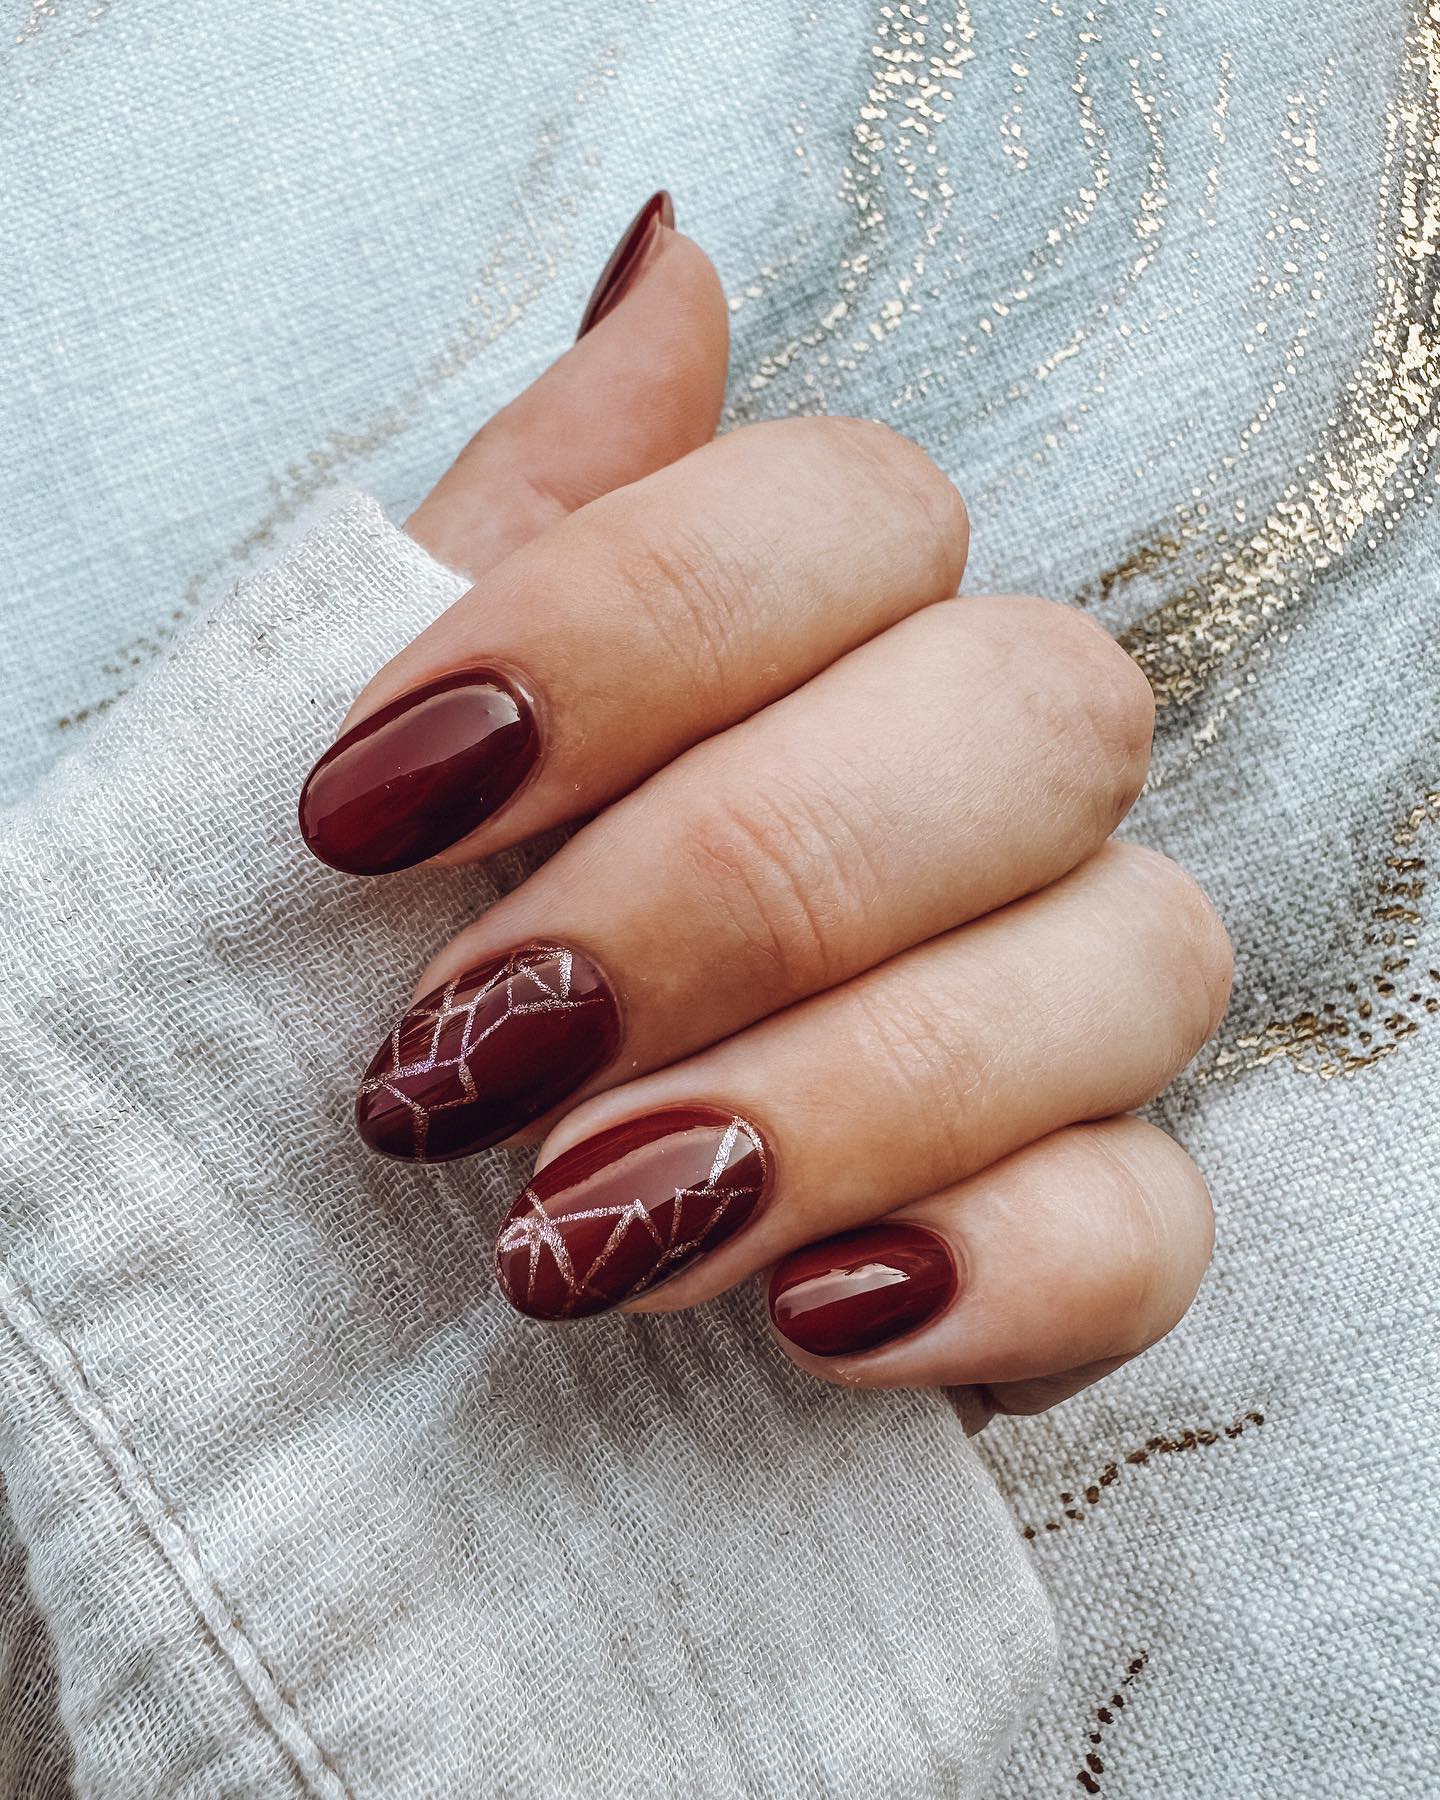 Amazon.com: EDA LUXURY BEAUTY Dark Red Burgundy Matte Luxe Press On Nails |  Full Cover Acrylic Nail Tips, Glue On False Nails, Extra Long Length -  Coffin, Ballerina, Square Design | Nail